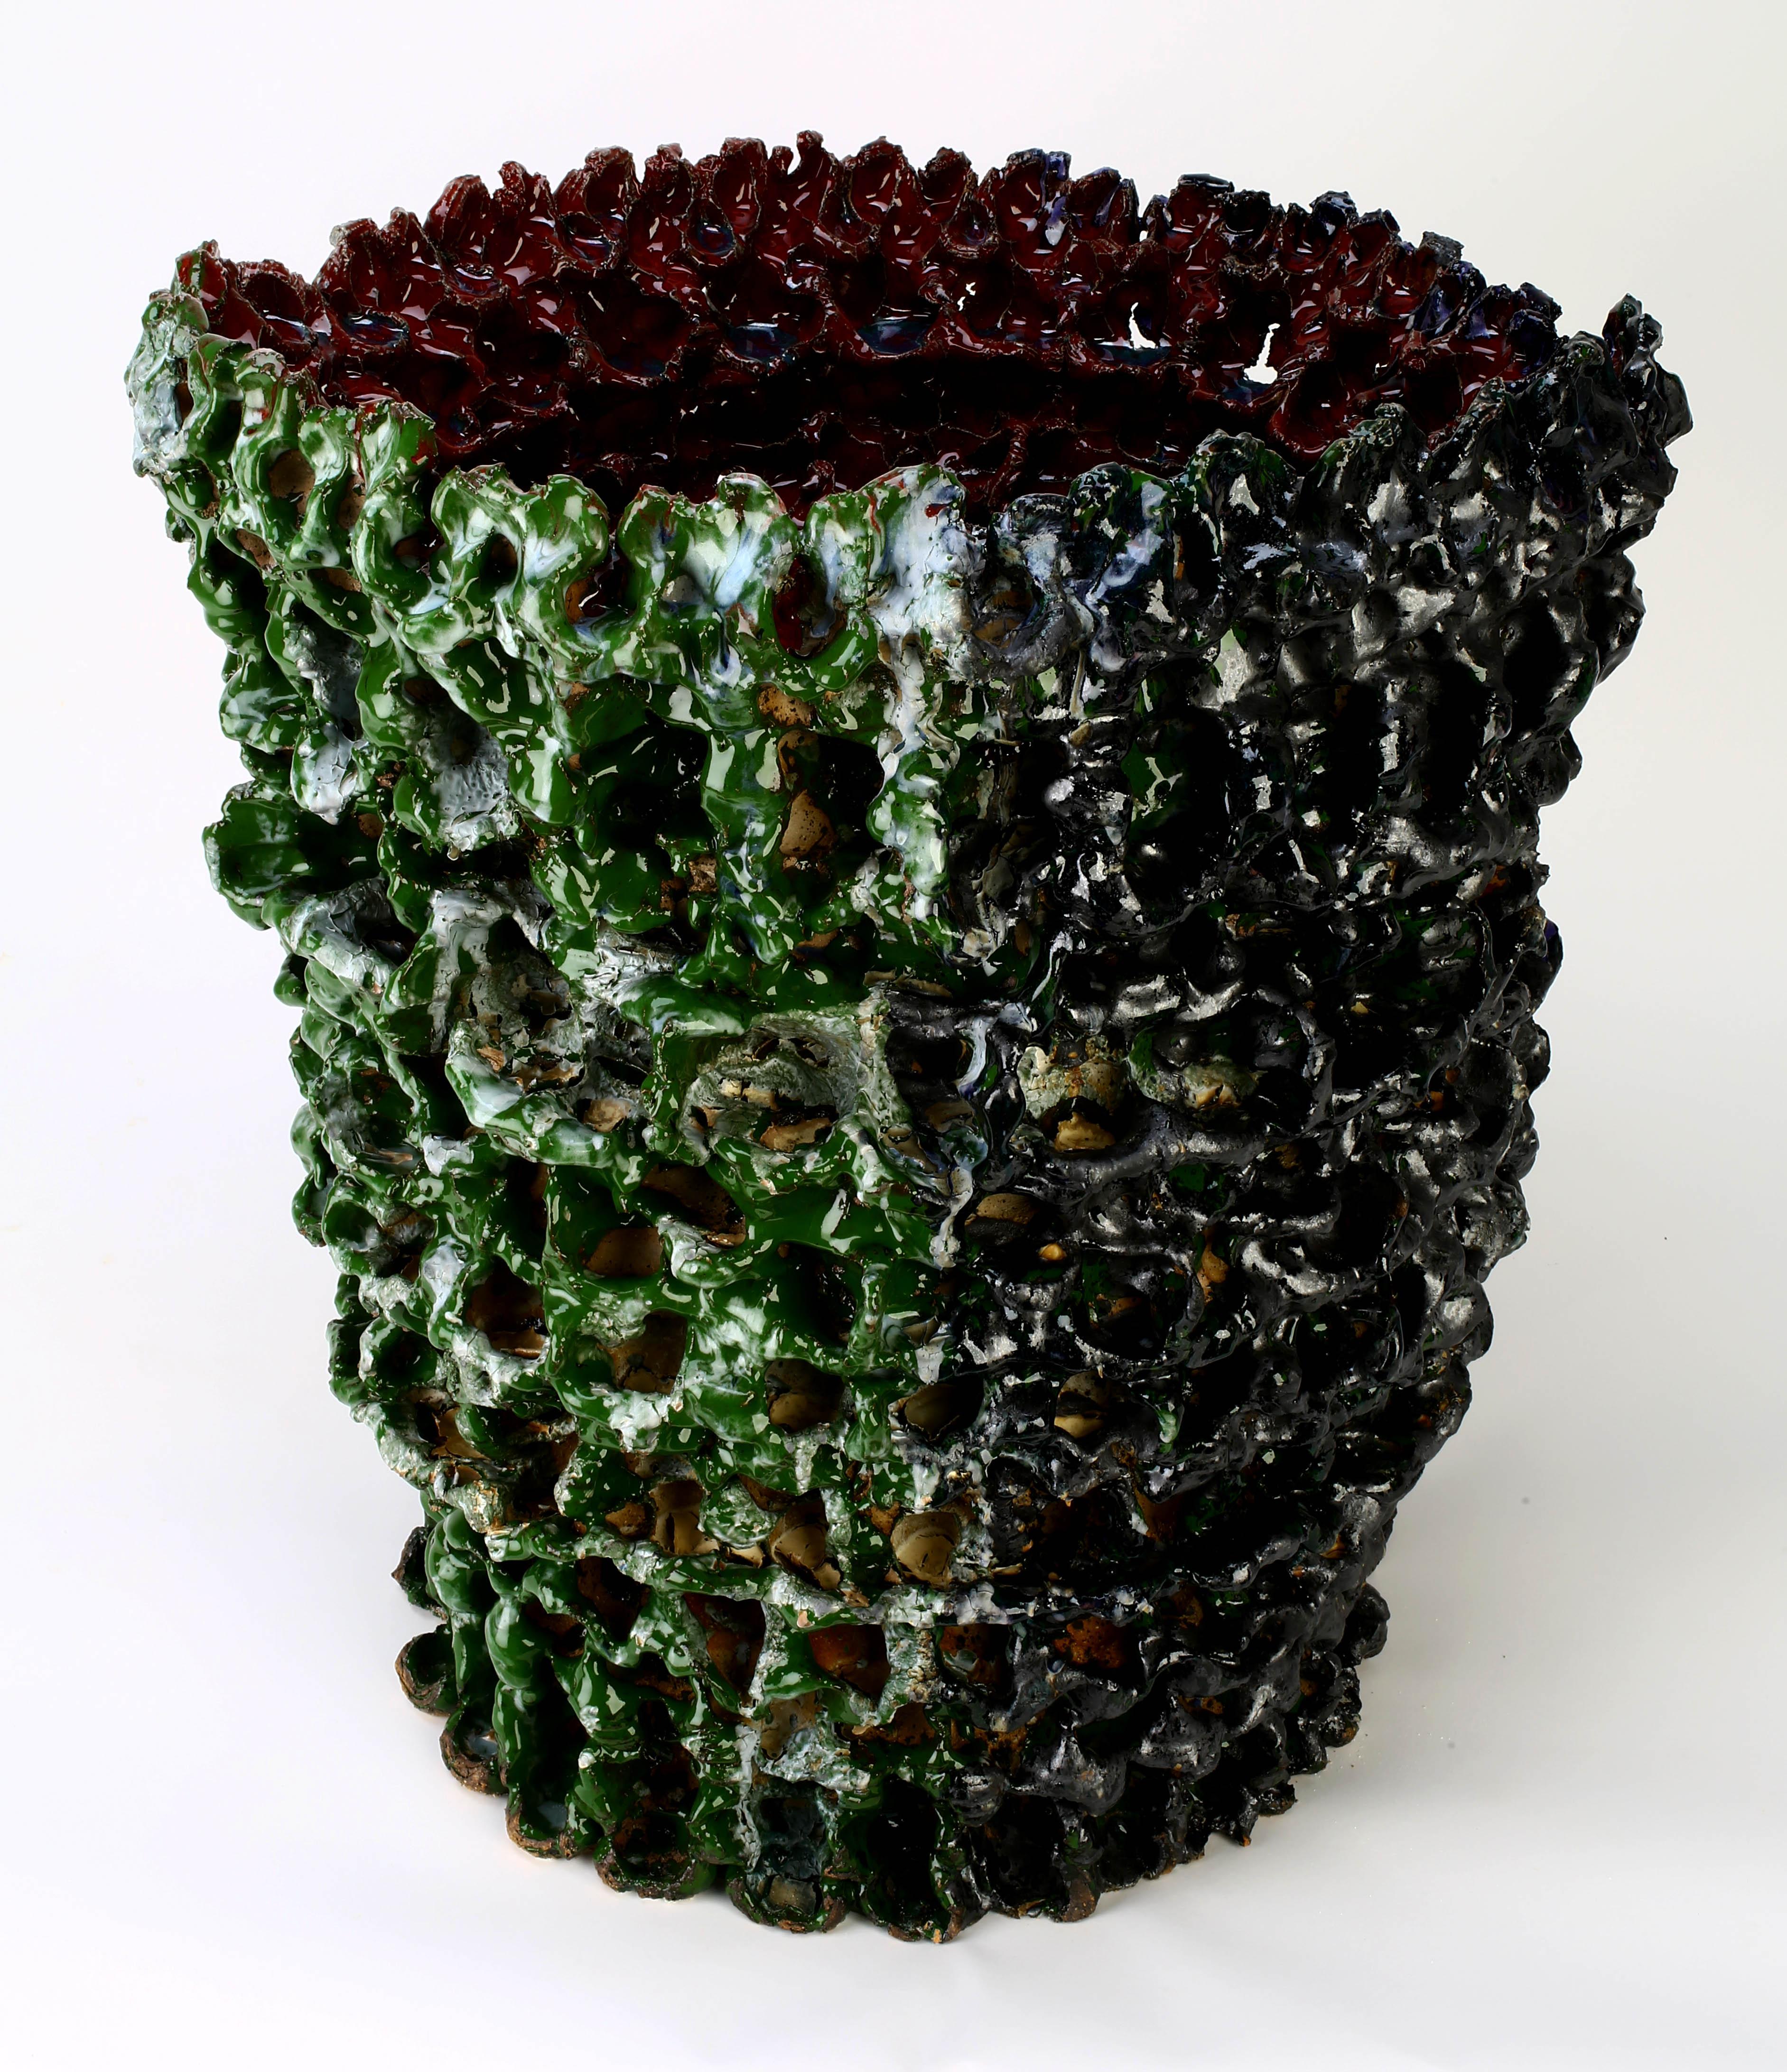 The three stoneware vessels are hand built using the coiling technique, a foundational process of ceramics in which coils of clay are stacked on top of each other and smoothed with the hands to create a form.

Note from the artist:

